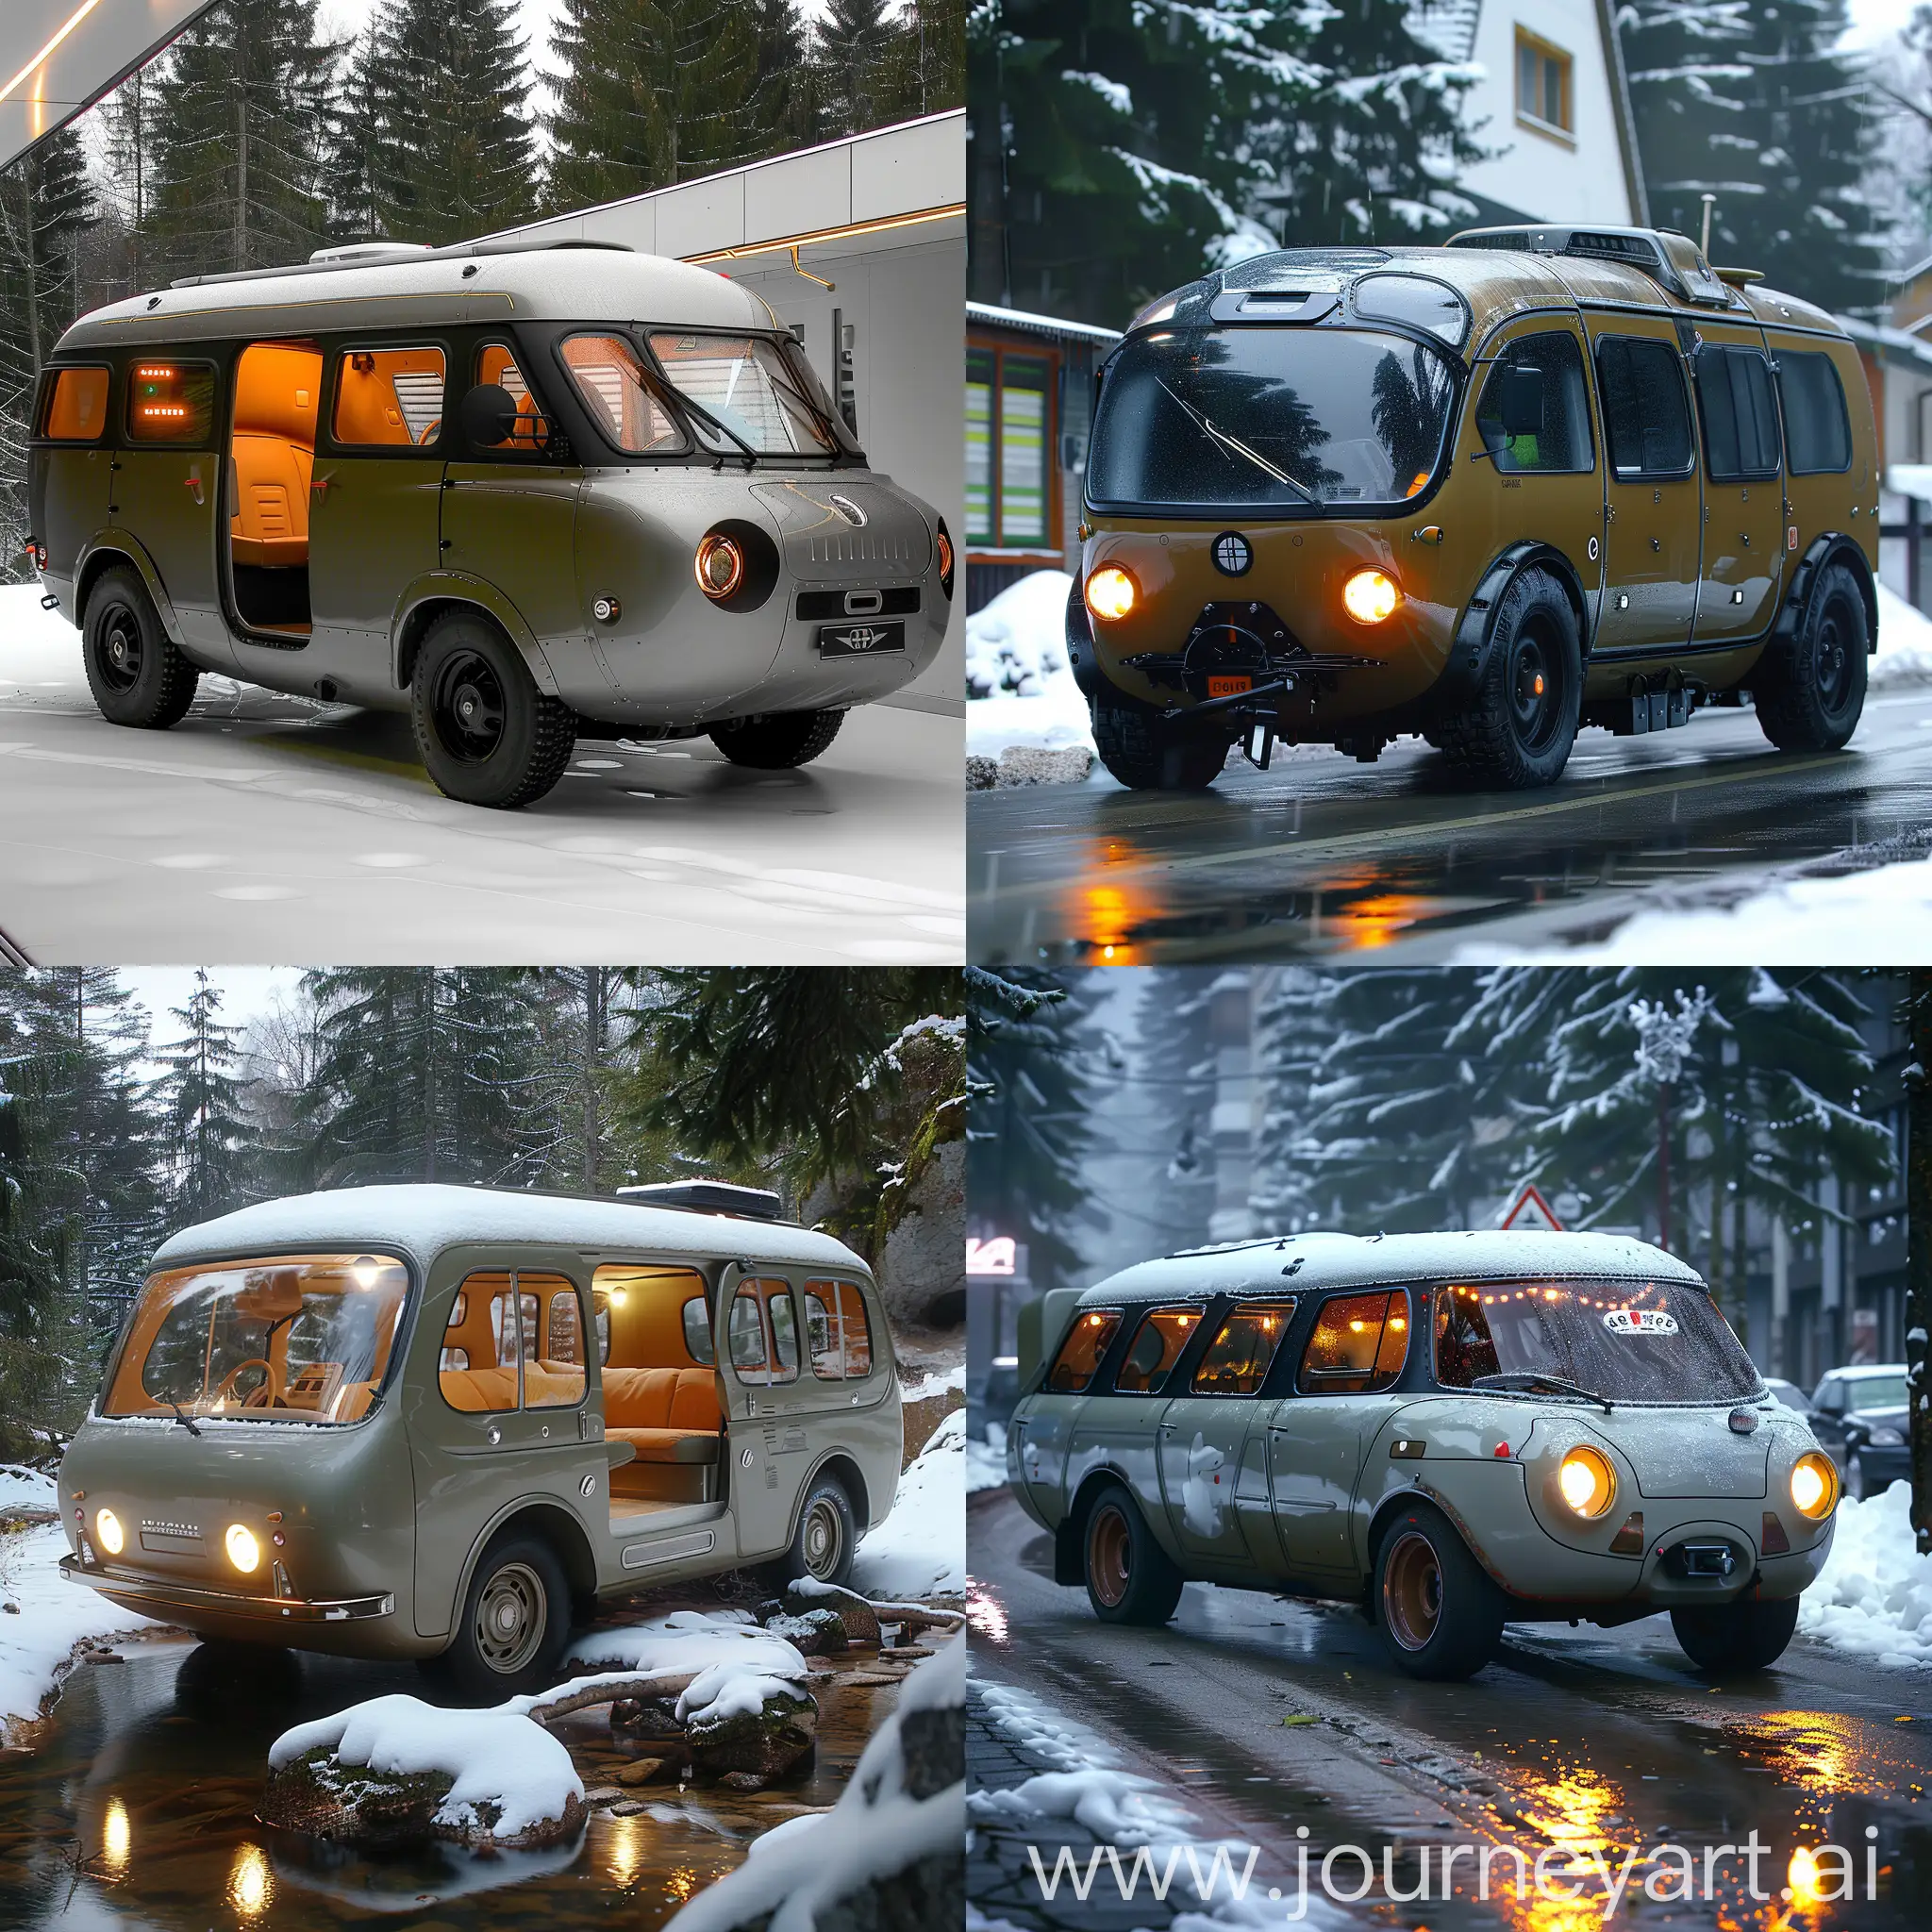 Futuristic:: UAZ-452 https://upload.wikimedia.org/wikipedia/commons/a/a1/UAZ-Bus.jpg, Autonomous driving capabilities, Augmented reality windshield displa, Biometric recognition system, Interactive holographic dashboard, Adaptive aerodynamics, Sustainable materials, Integrated health monitoring system, Multi-functional interior design, Energy-efficient lighting, Advanced connectivity features, Lightweight and durable materials, Aerodynamic design, Advanced suspension system, Electric drivetrain, Advanced safety features, Smart connectivity, Customizable interior, Advanced lighting technology, Intelligent off-road capabilities, Sustainable design principles, octane render --stylize 1000